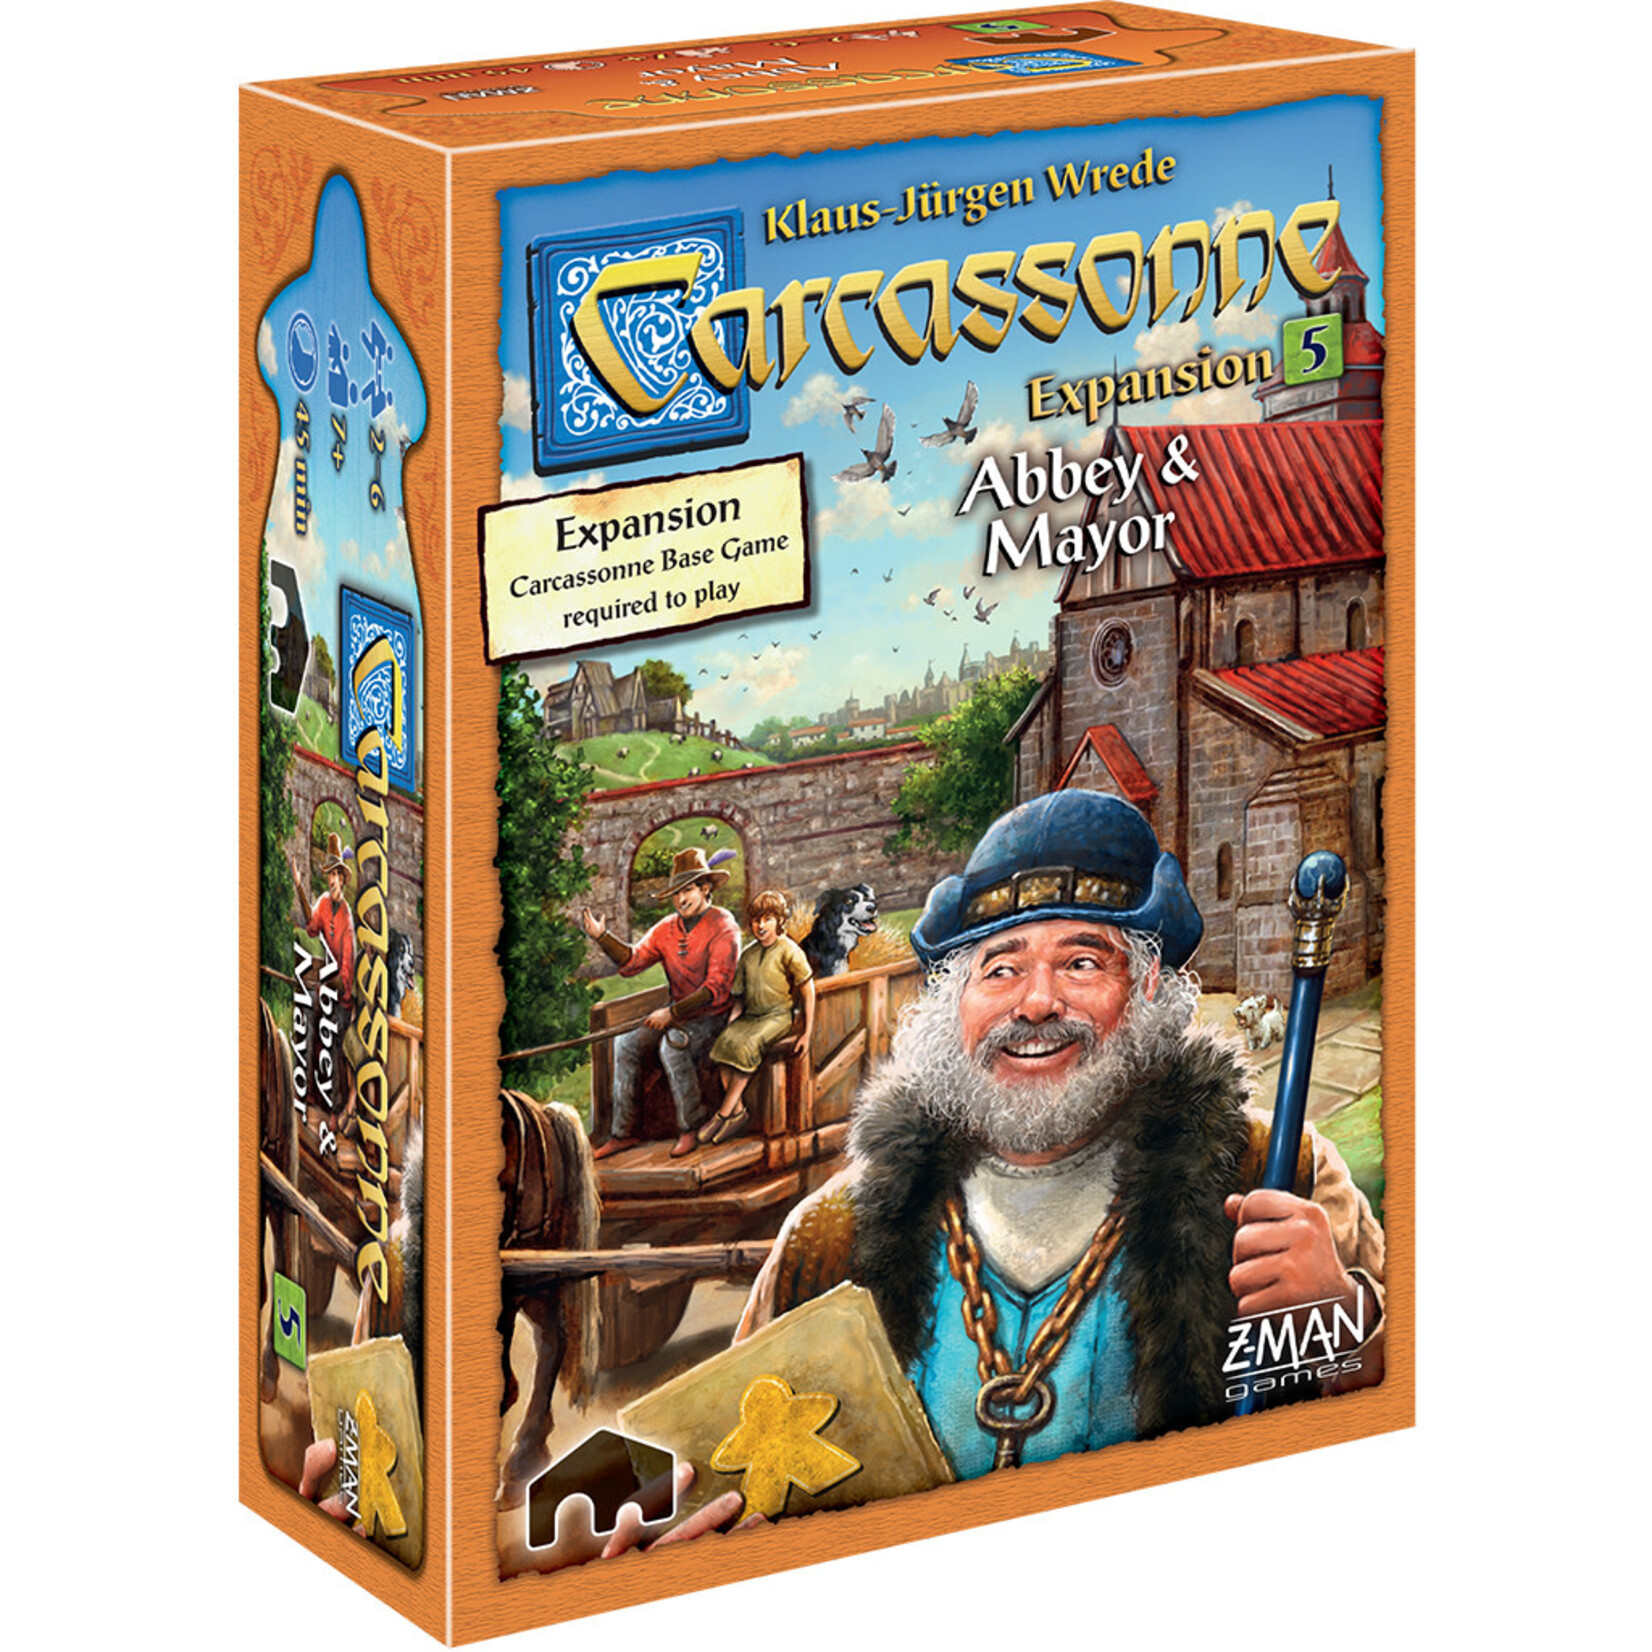 Z-Man Games Carcassonne Expansion 5: Abbey and Mayor